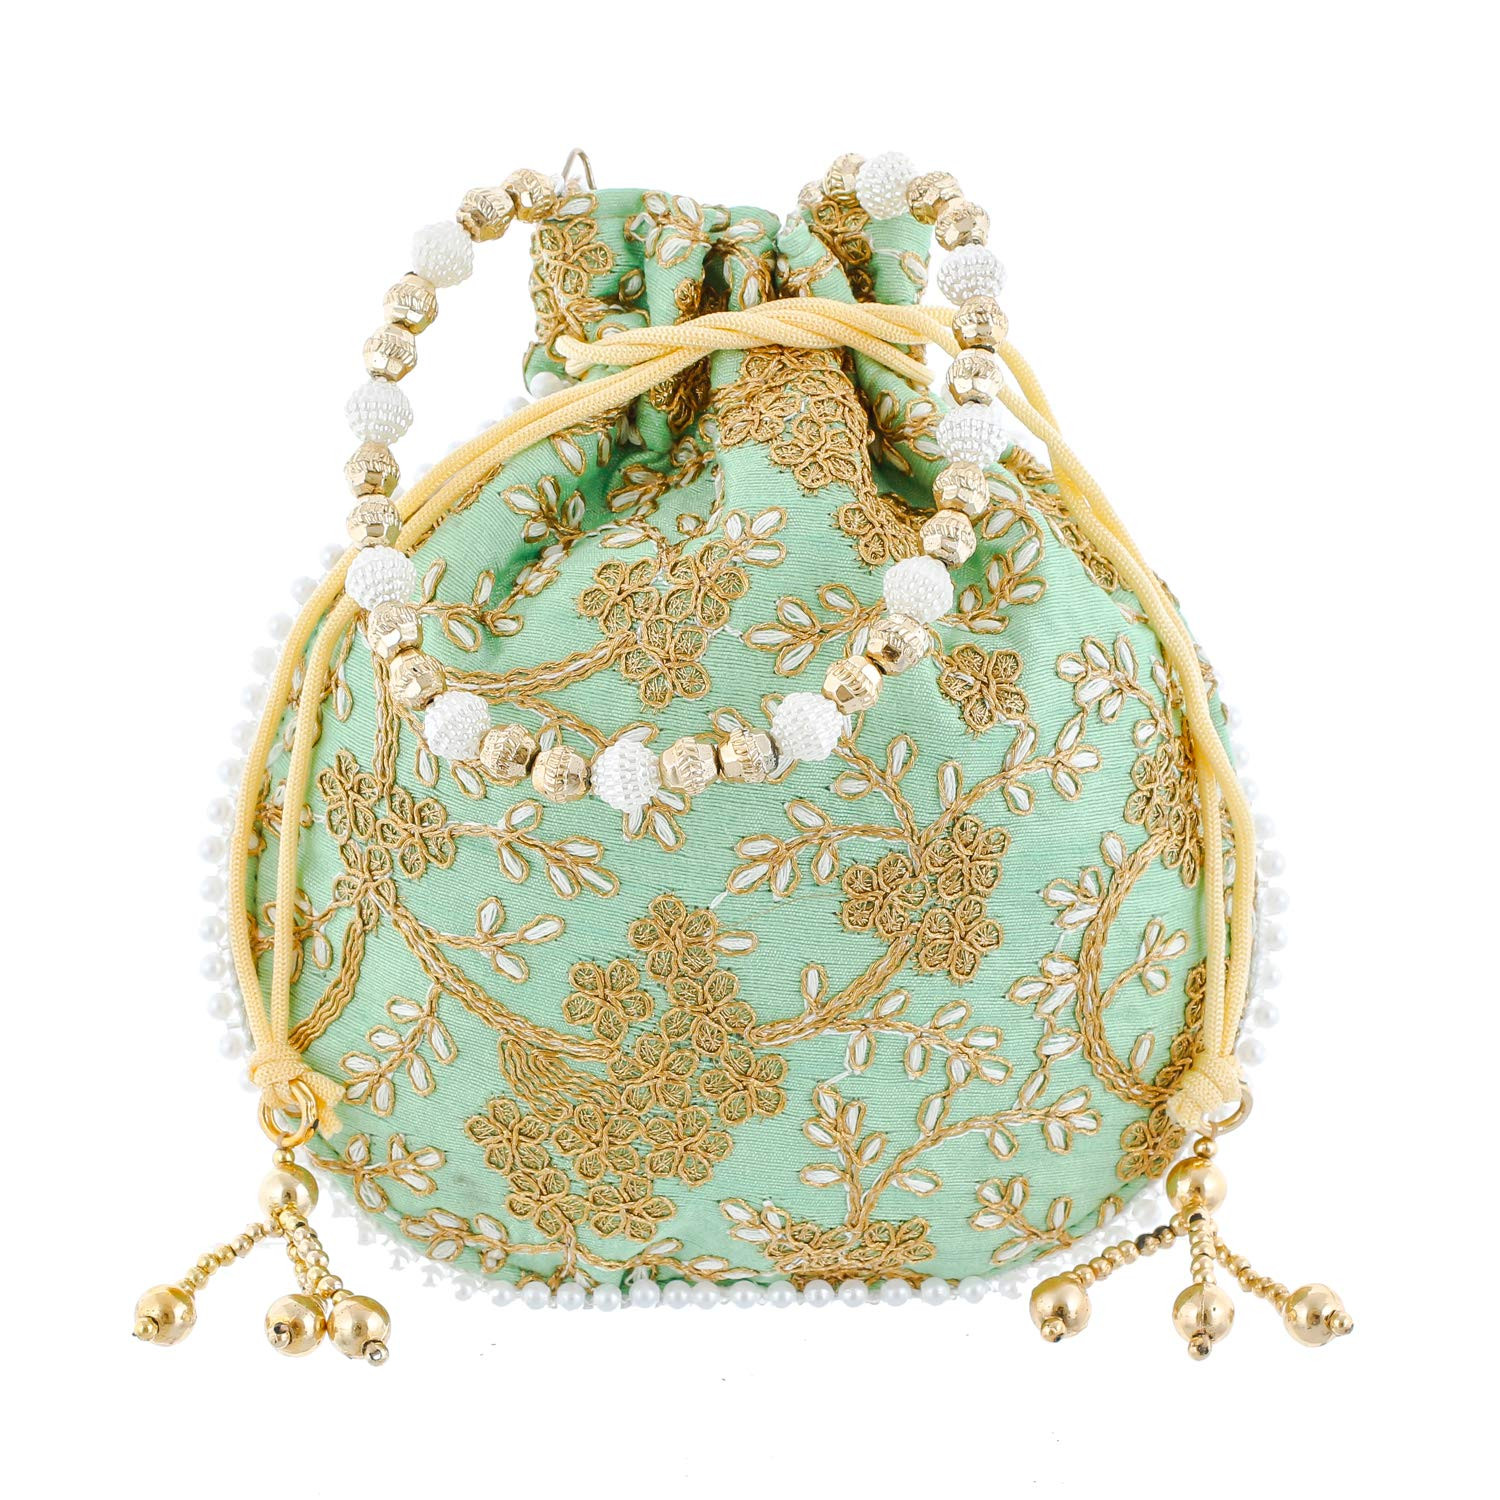 Kuber Industries Embroidery Drawstring Potli|Hand Purse With Gold Pearl Border & Handle For Woman,Girls (Green)